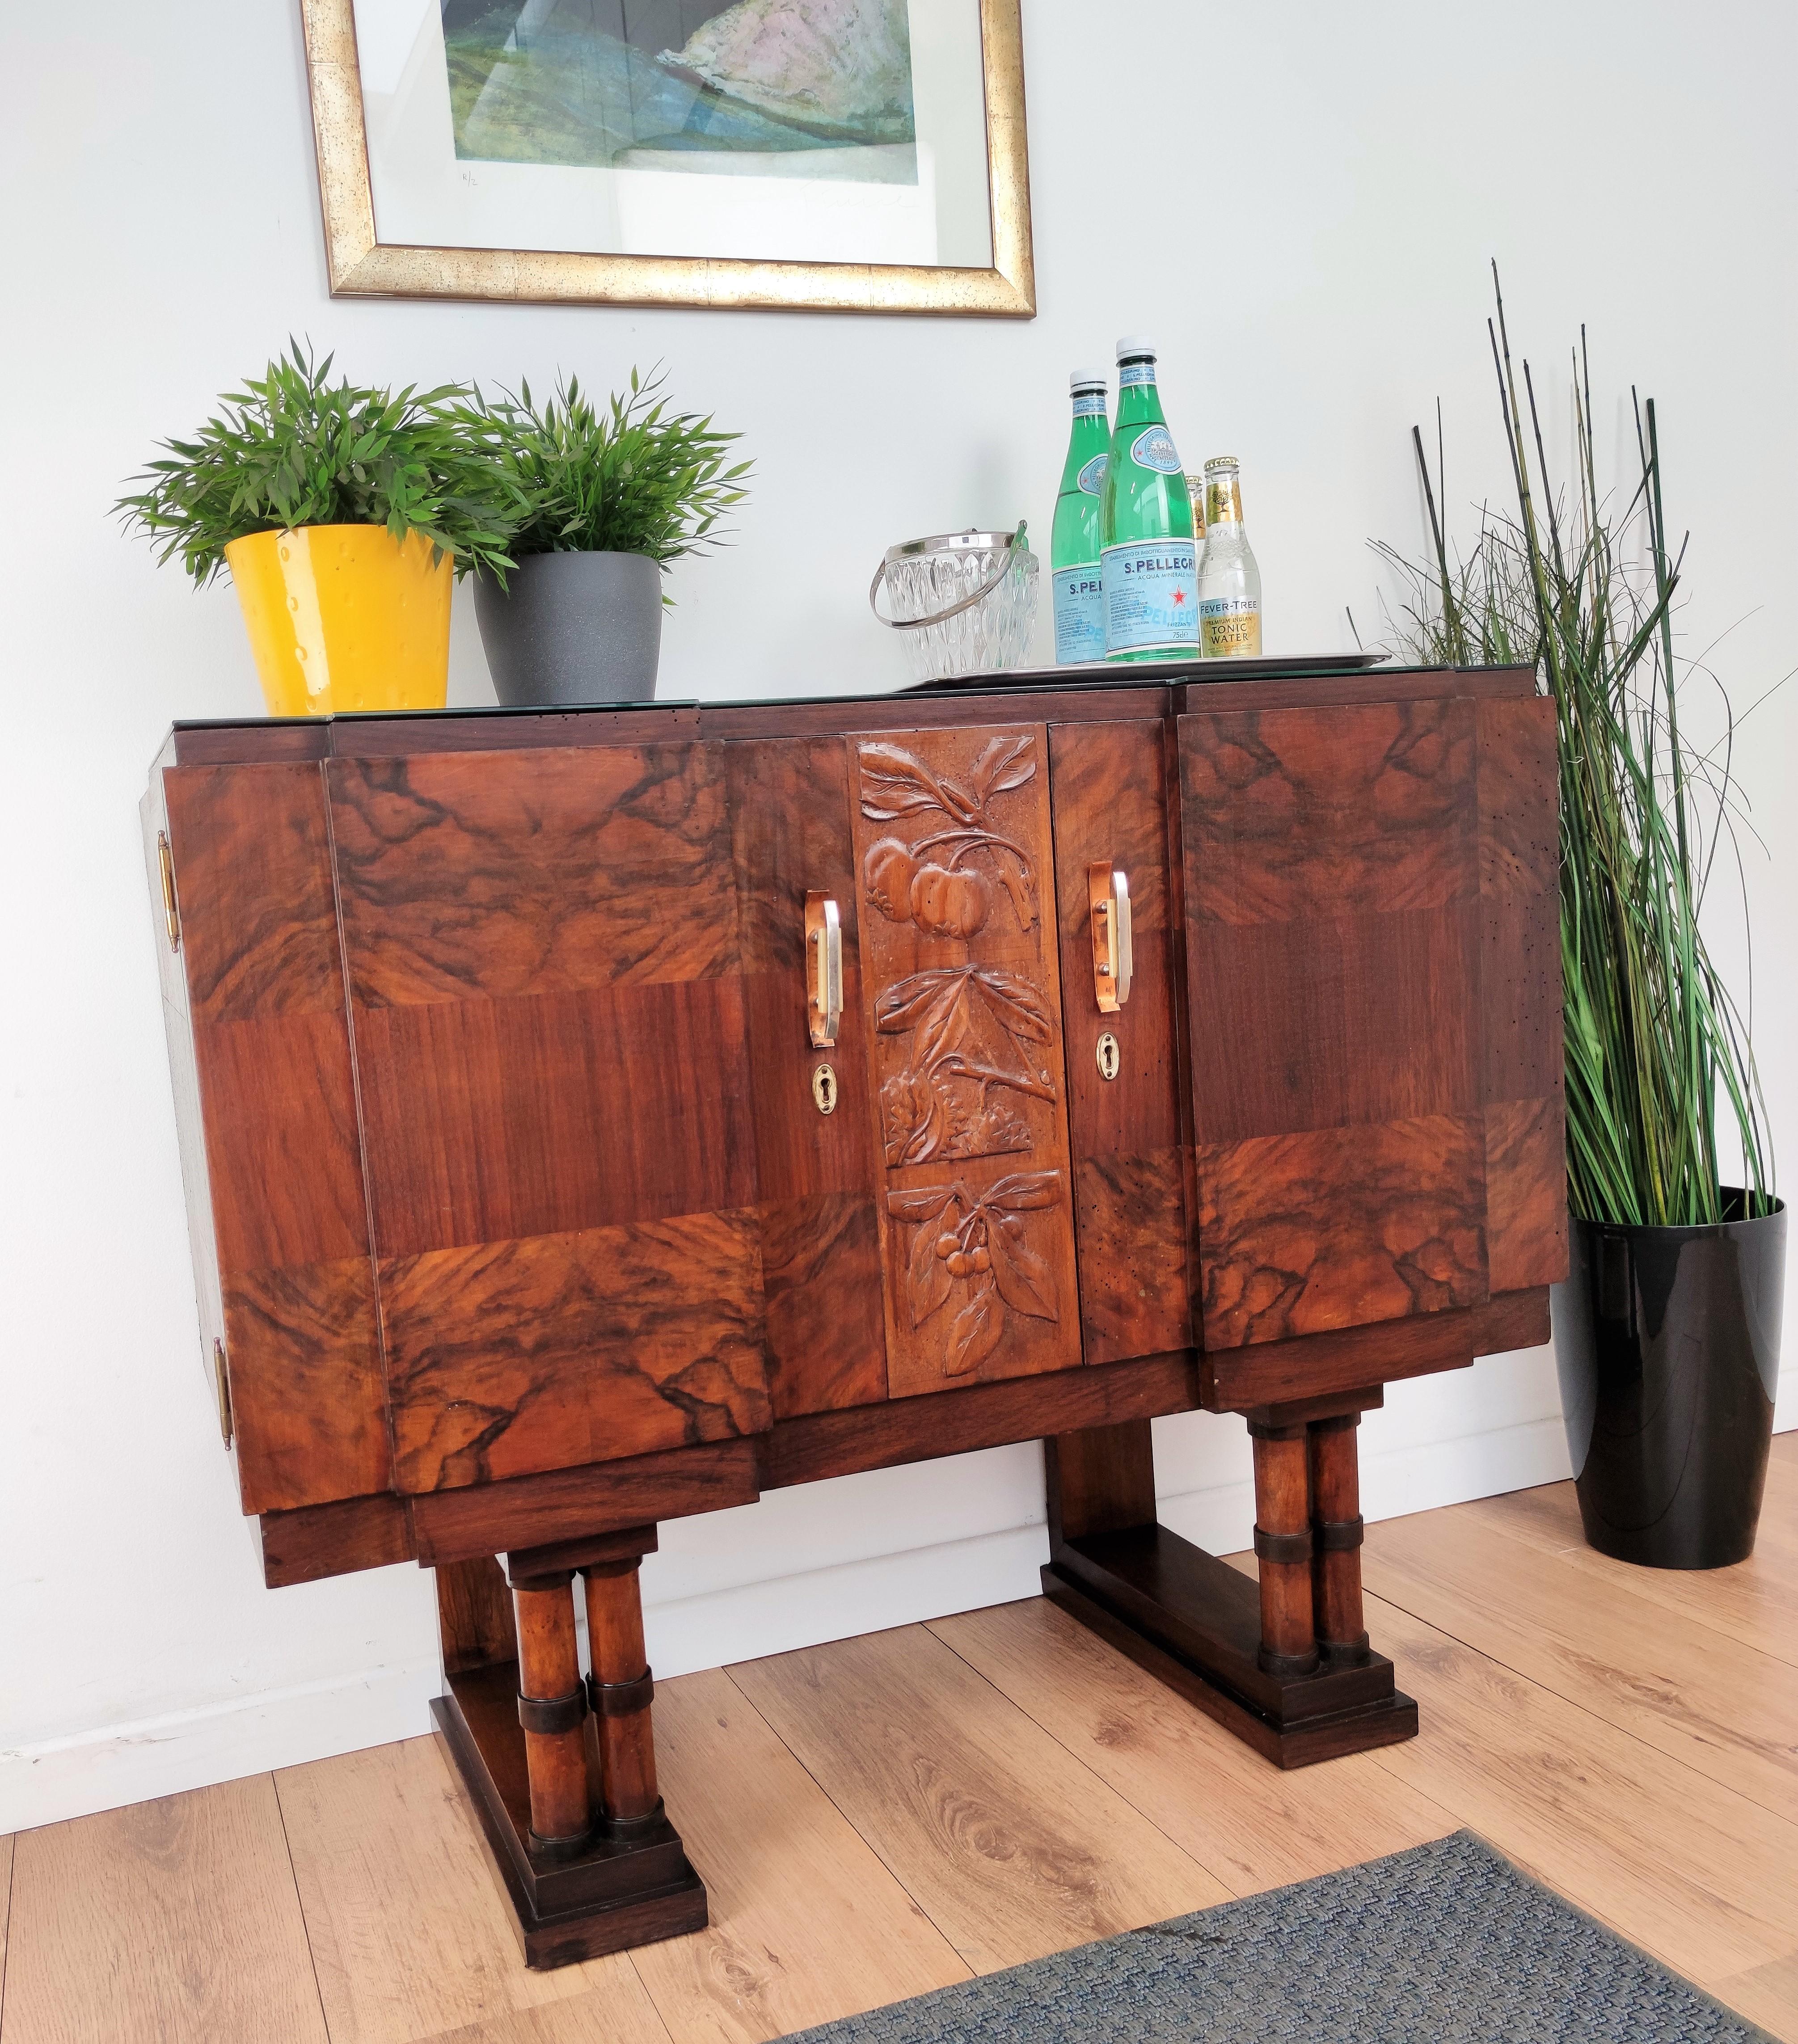 Beautifully shaped, decorated and crafted Italian Art Deco sideboard credenza bar cabinet, in walnut and burl, with great decorative use of the veneer and central crafted decor, two doors with antique brass door handles, standing on greatly crafted